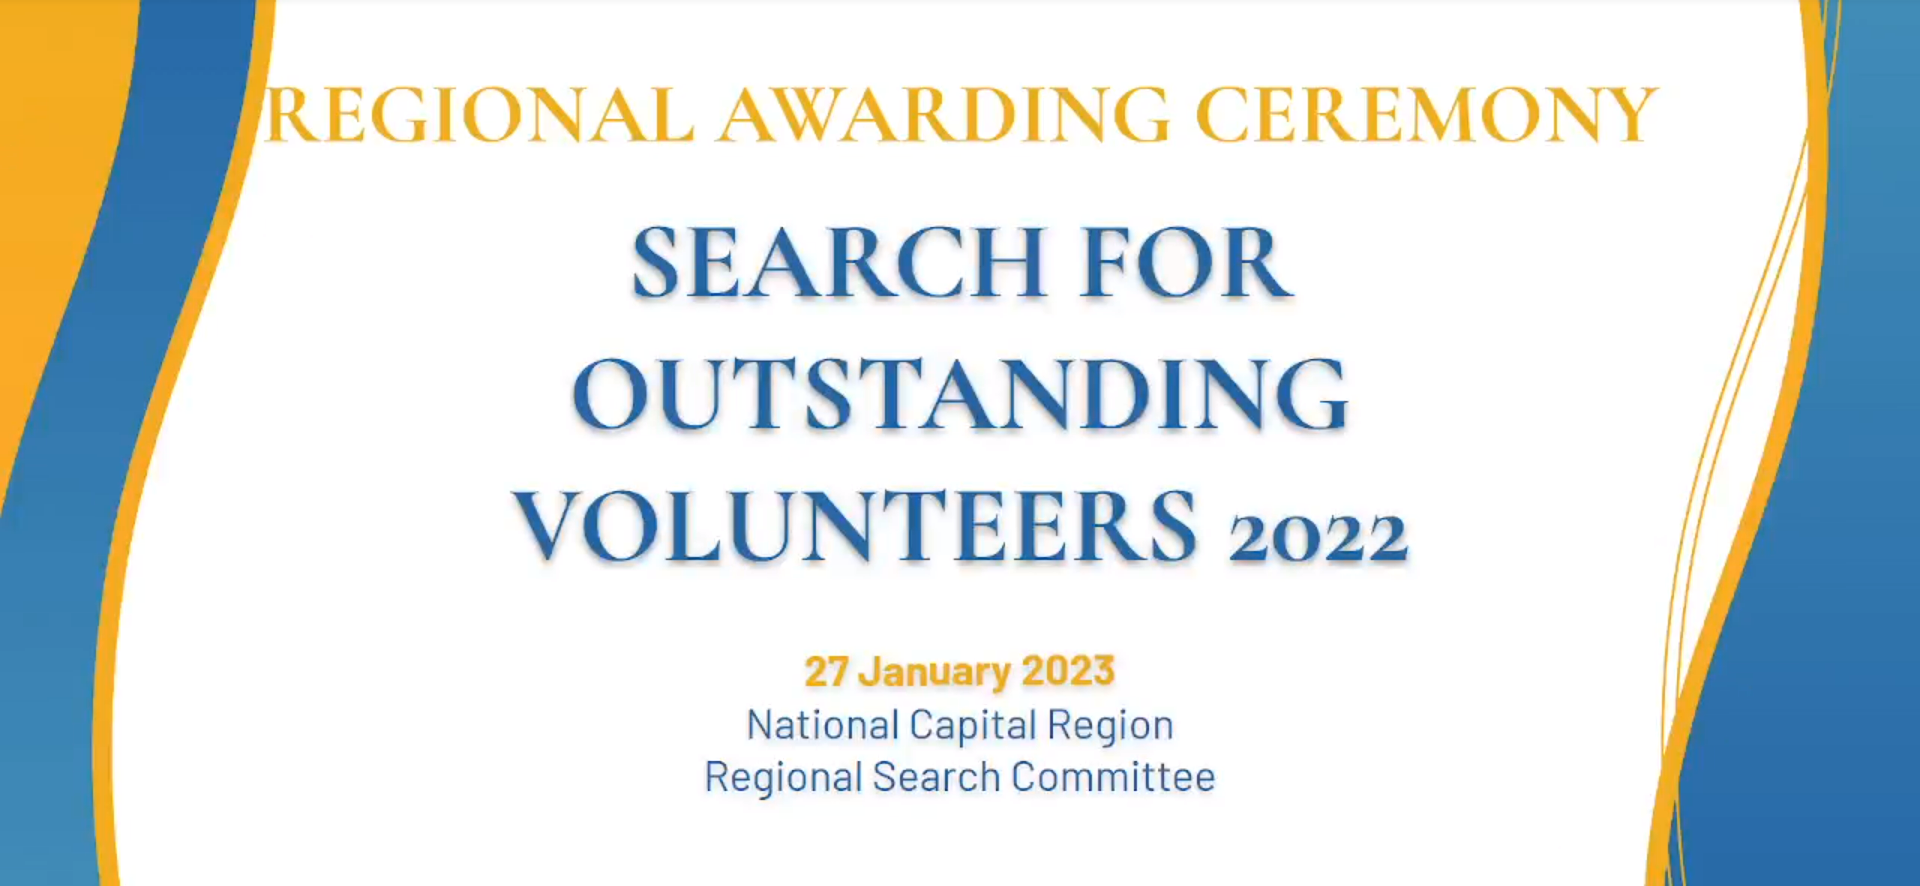 Screenshot From The Ncr Regional Search Committee